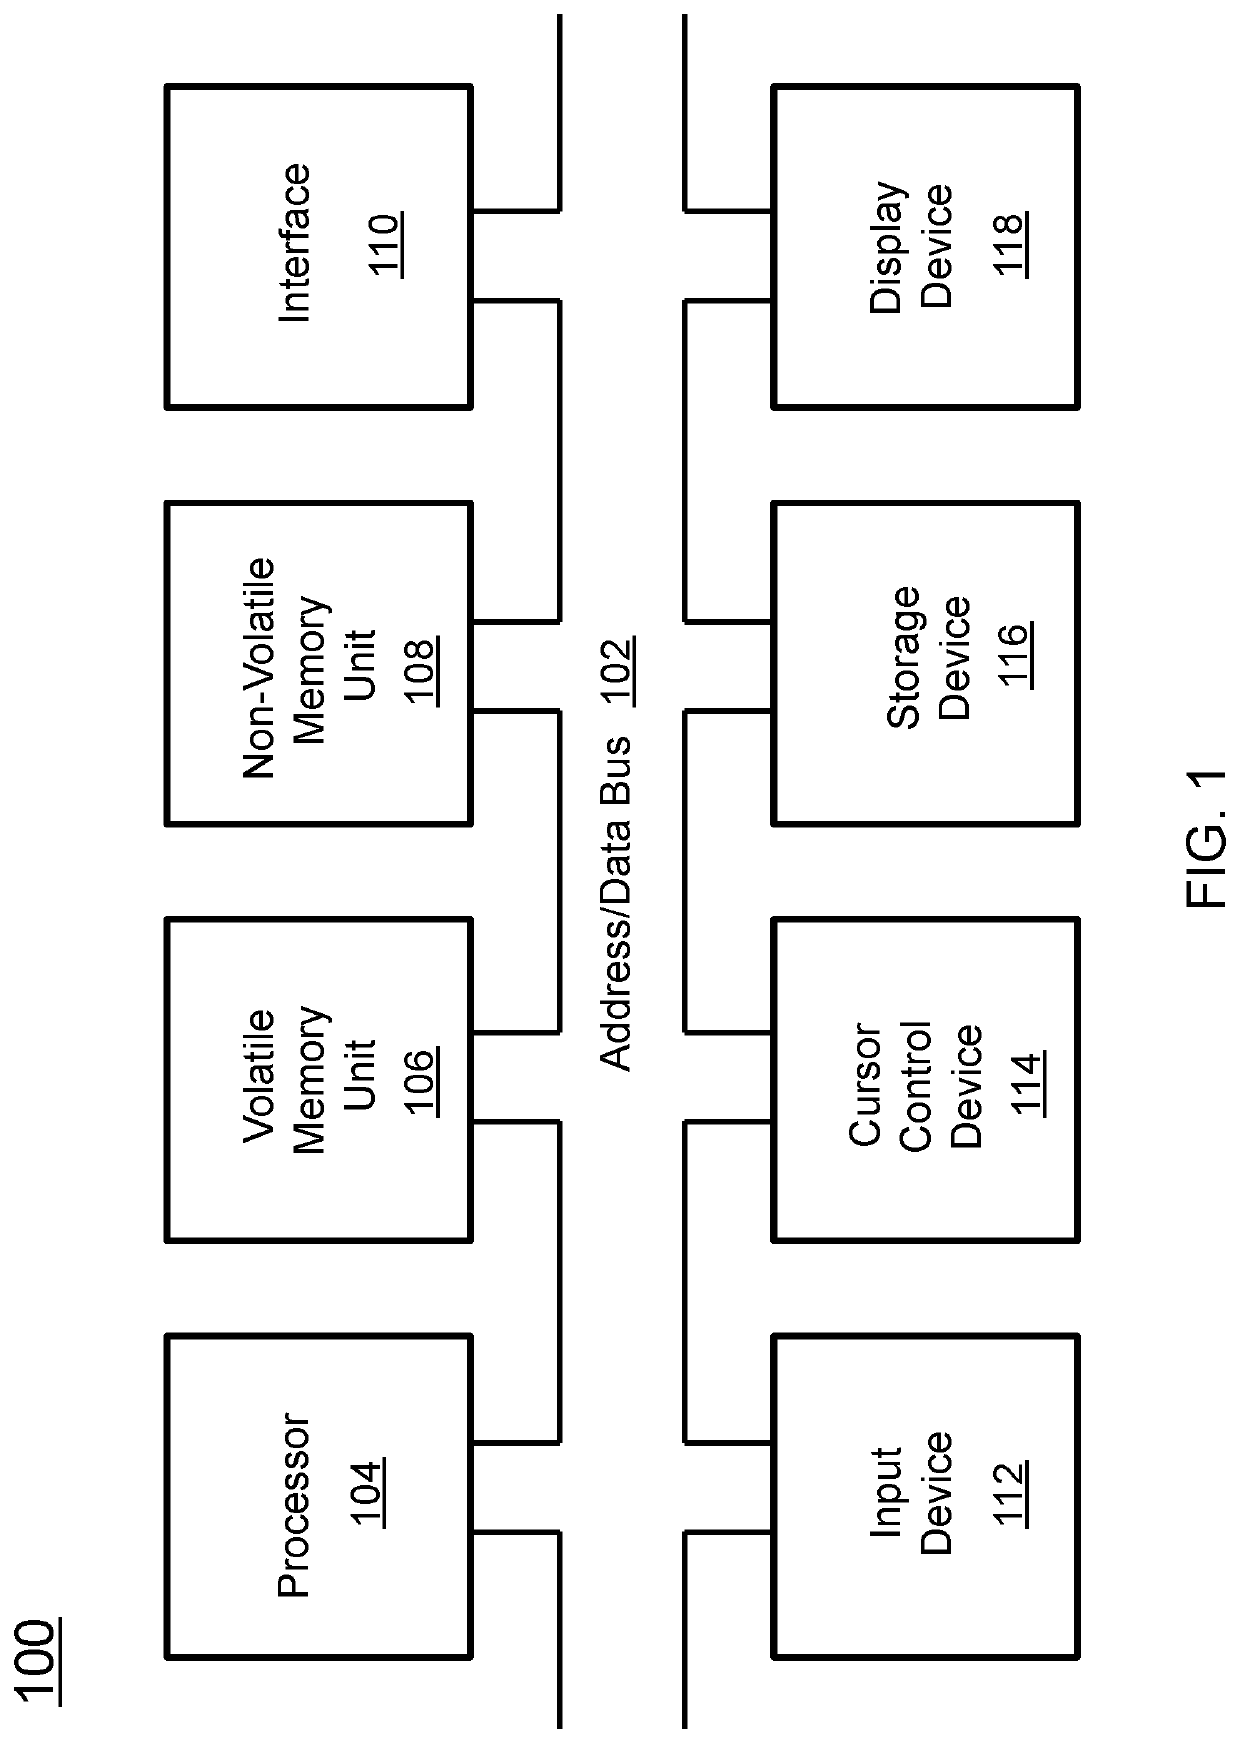 Process to control a networked system of time varying devices